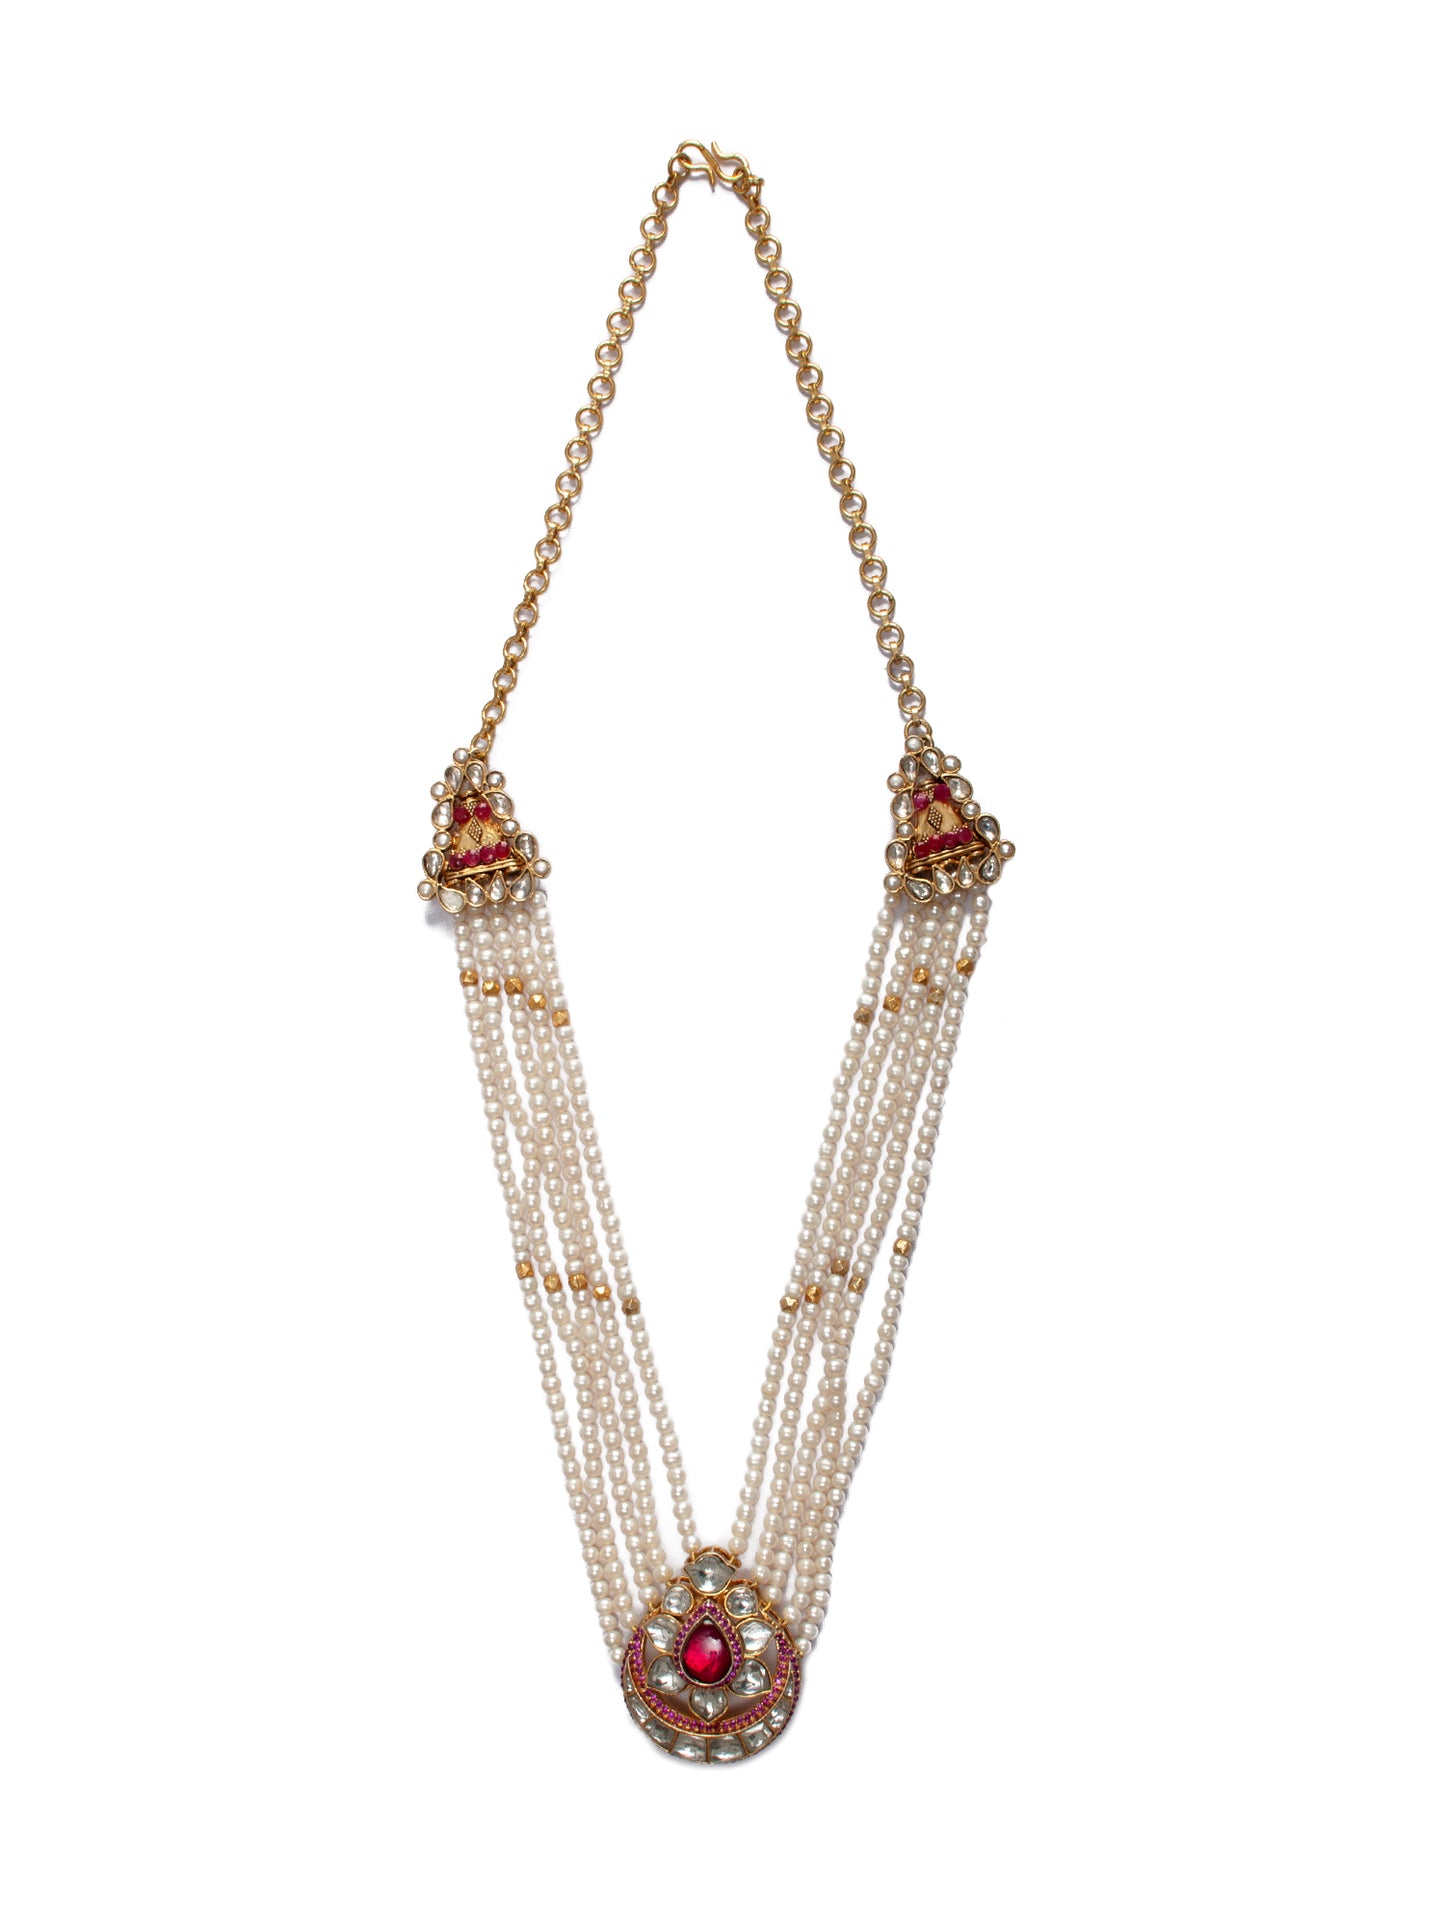 925 Sterling Silver 22K Gold Plated Pearl Beaded Chaandbali Necklace With White and Red Kundan